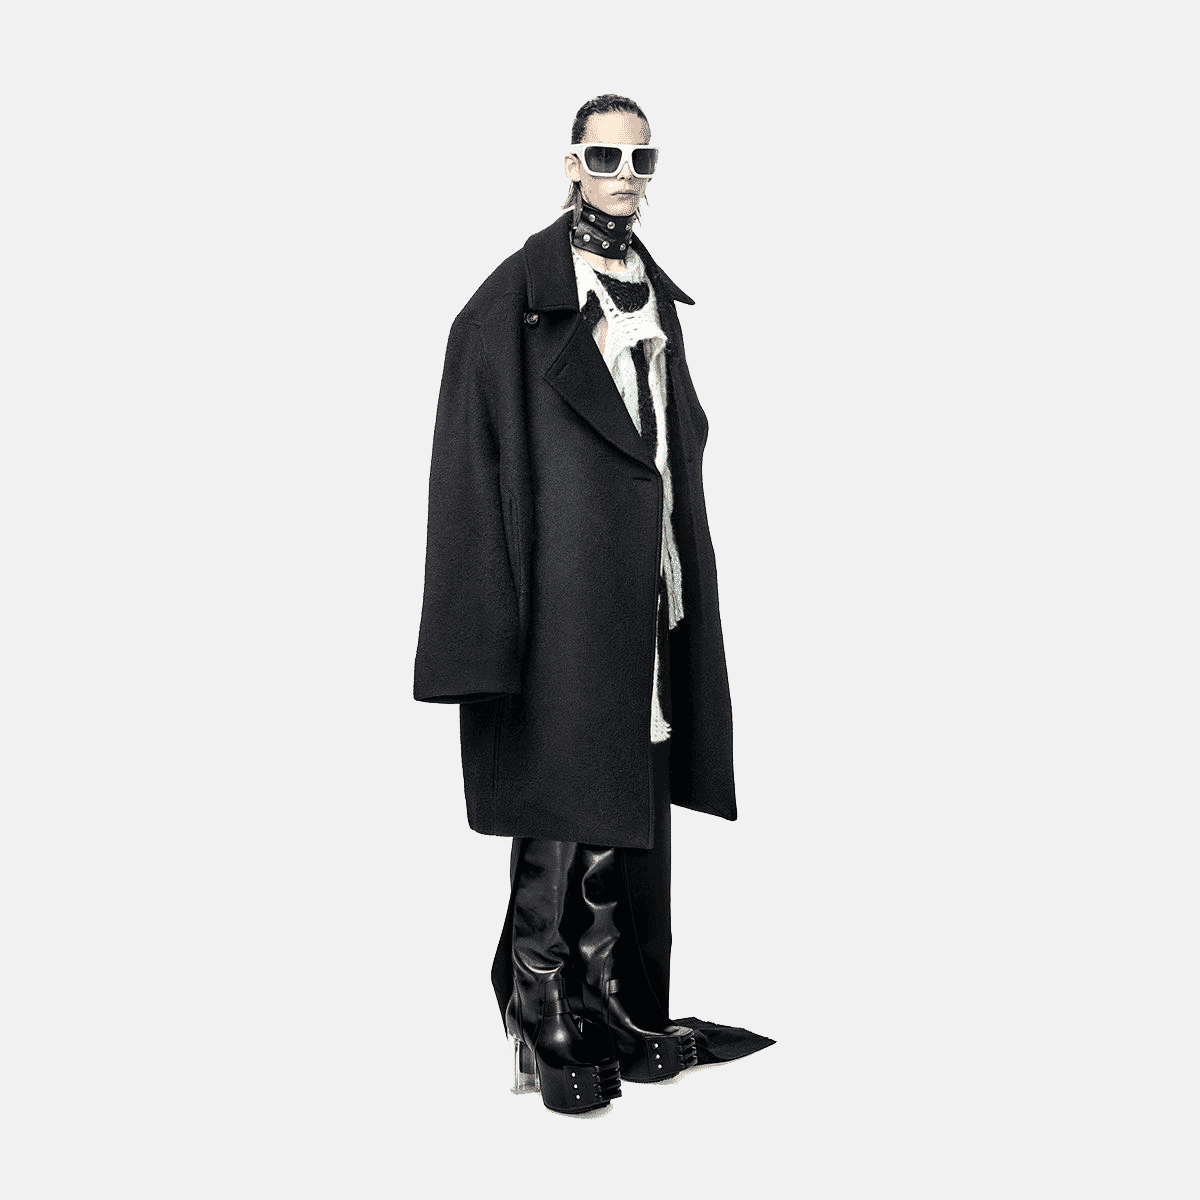 Rick Owens sizing guide: Find your fit | OPUMO Magazine